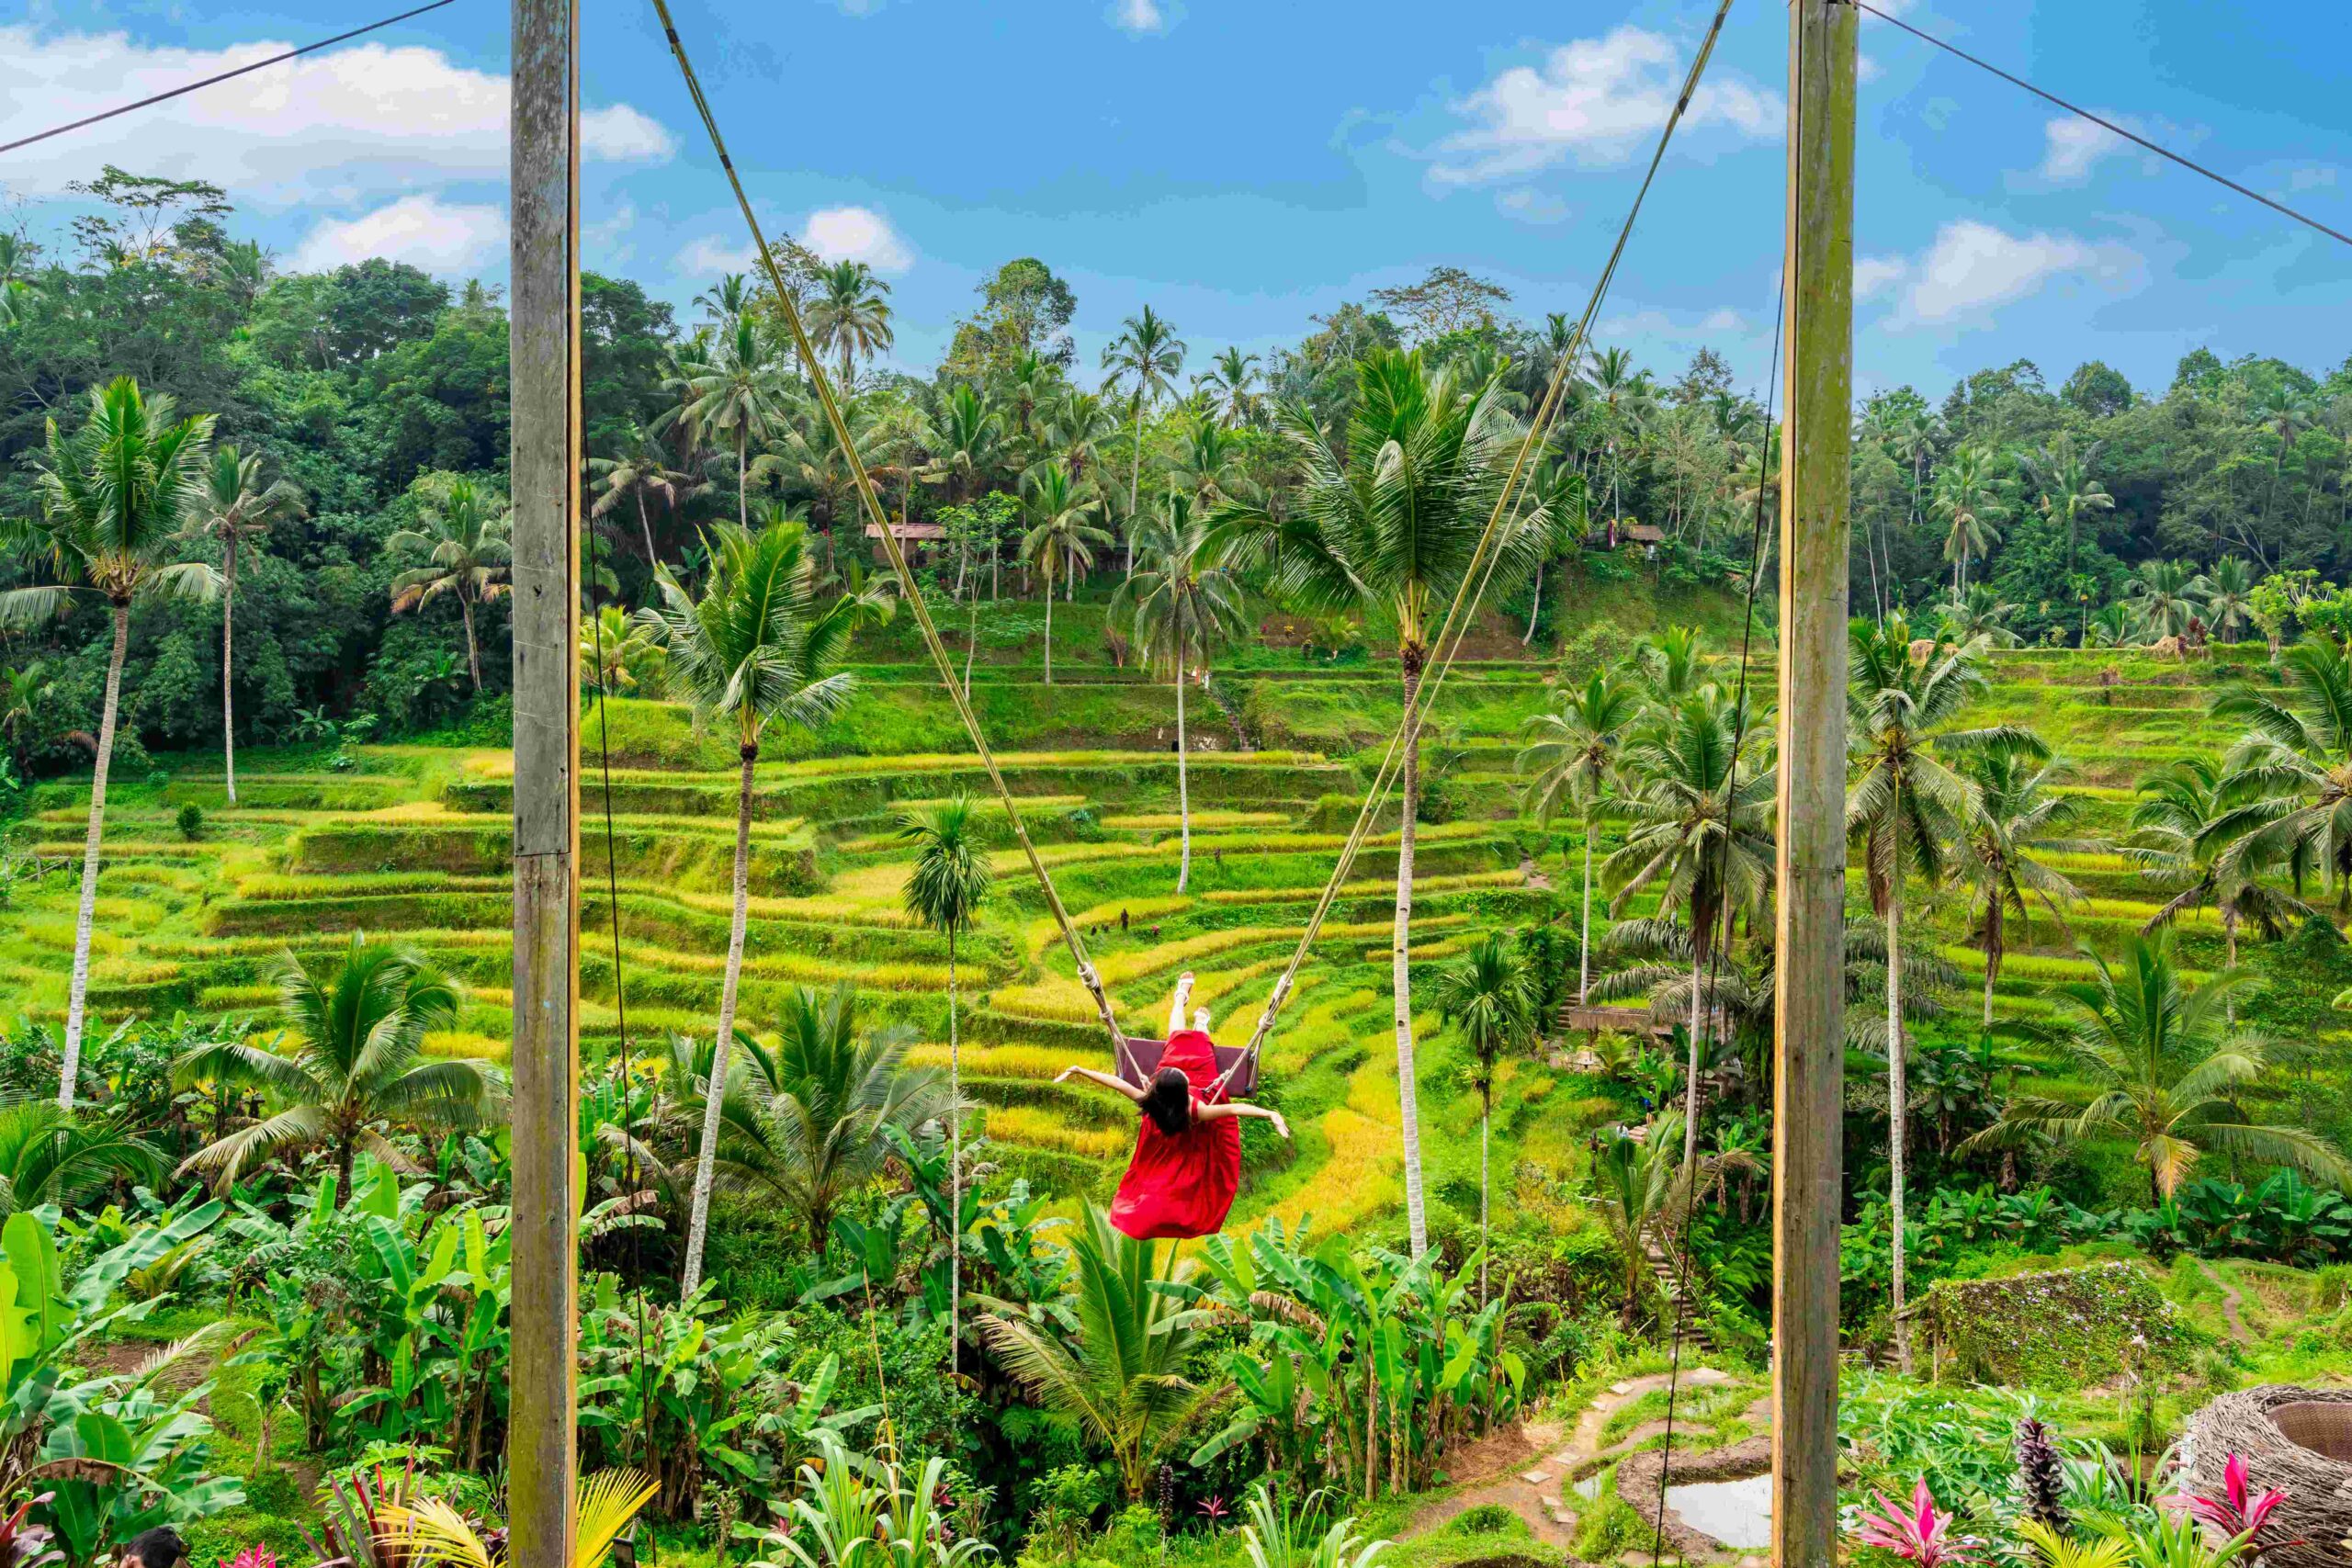 The Ultimate 5 Day Bali Itinerary: How To Spend 5 Amazing Days